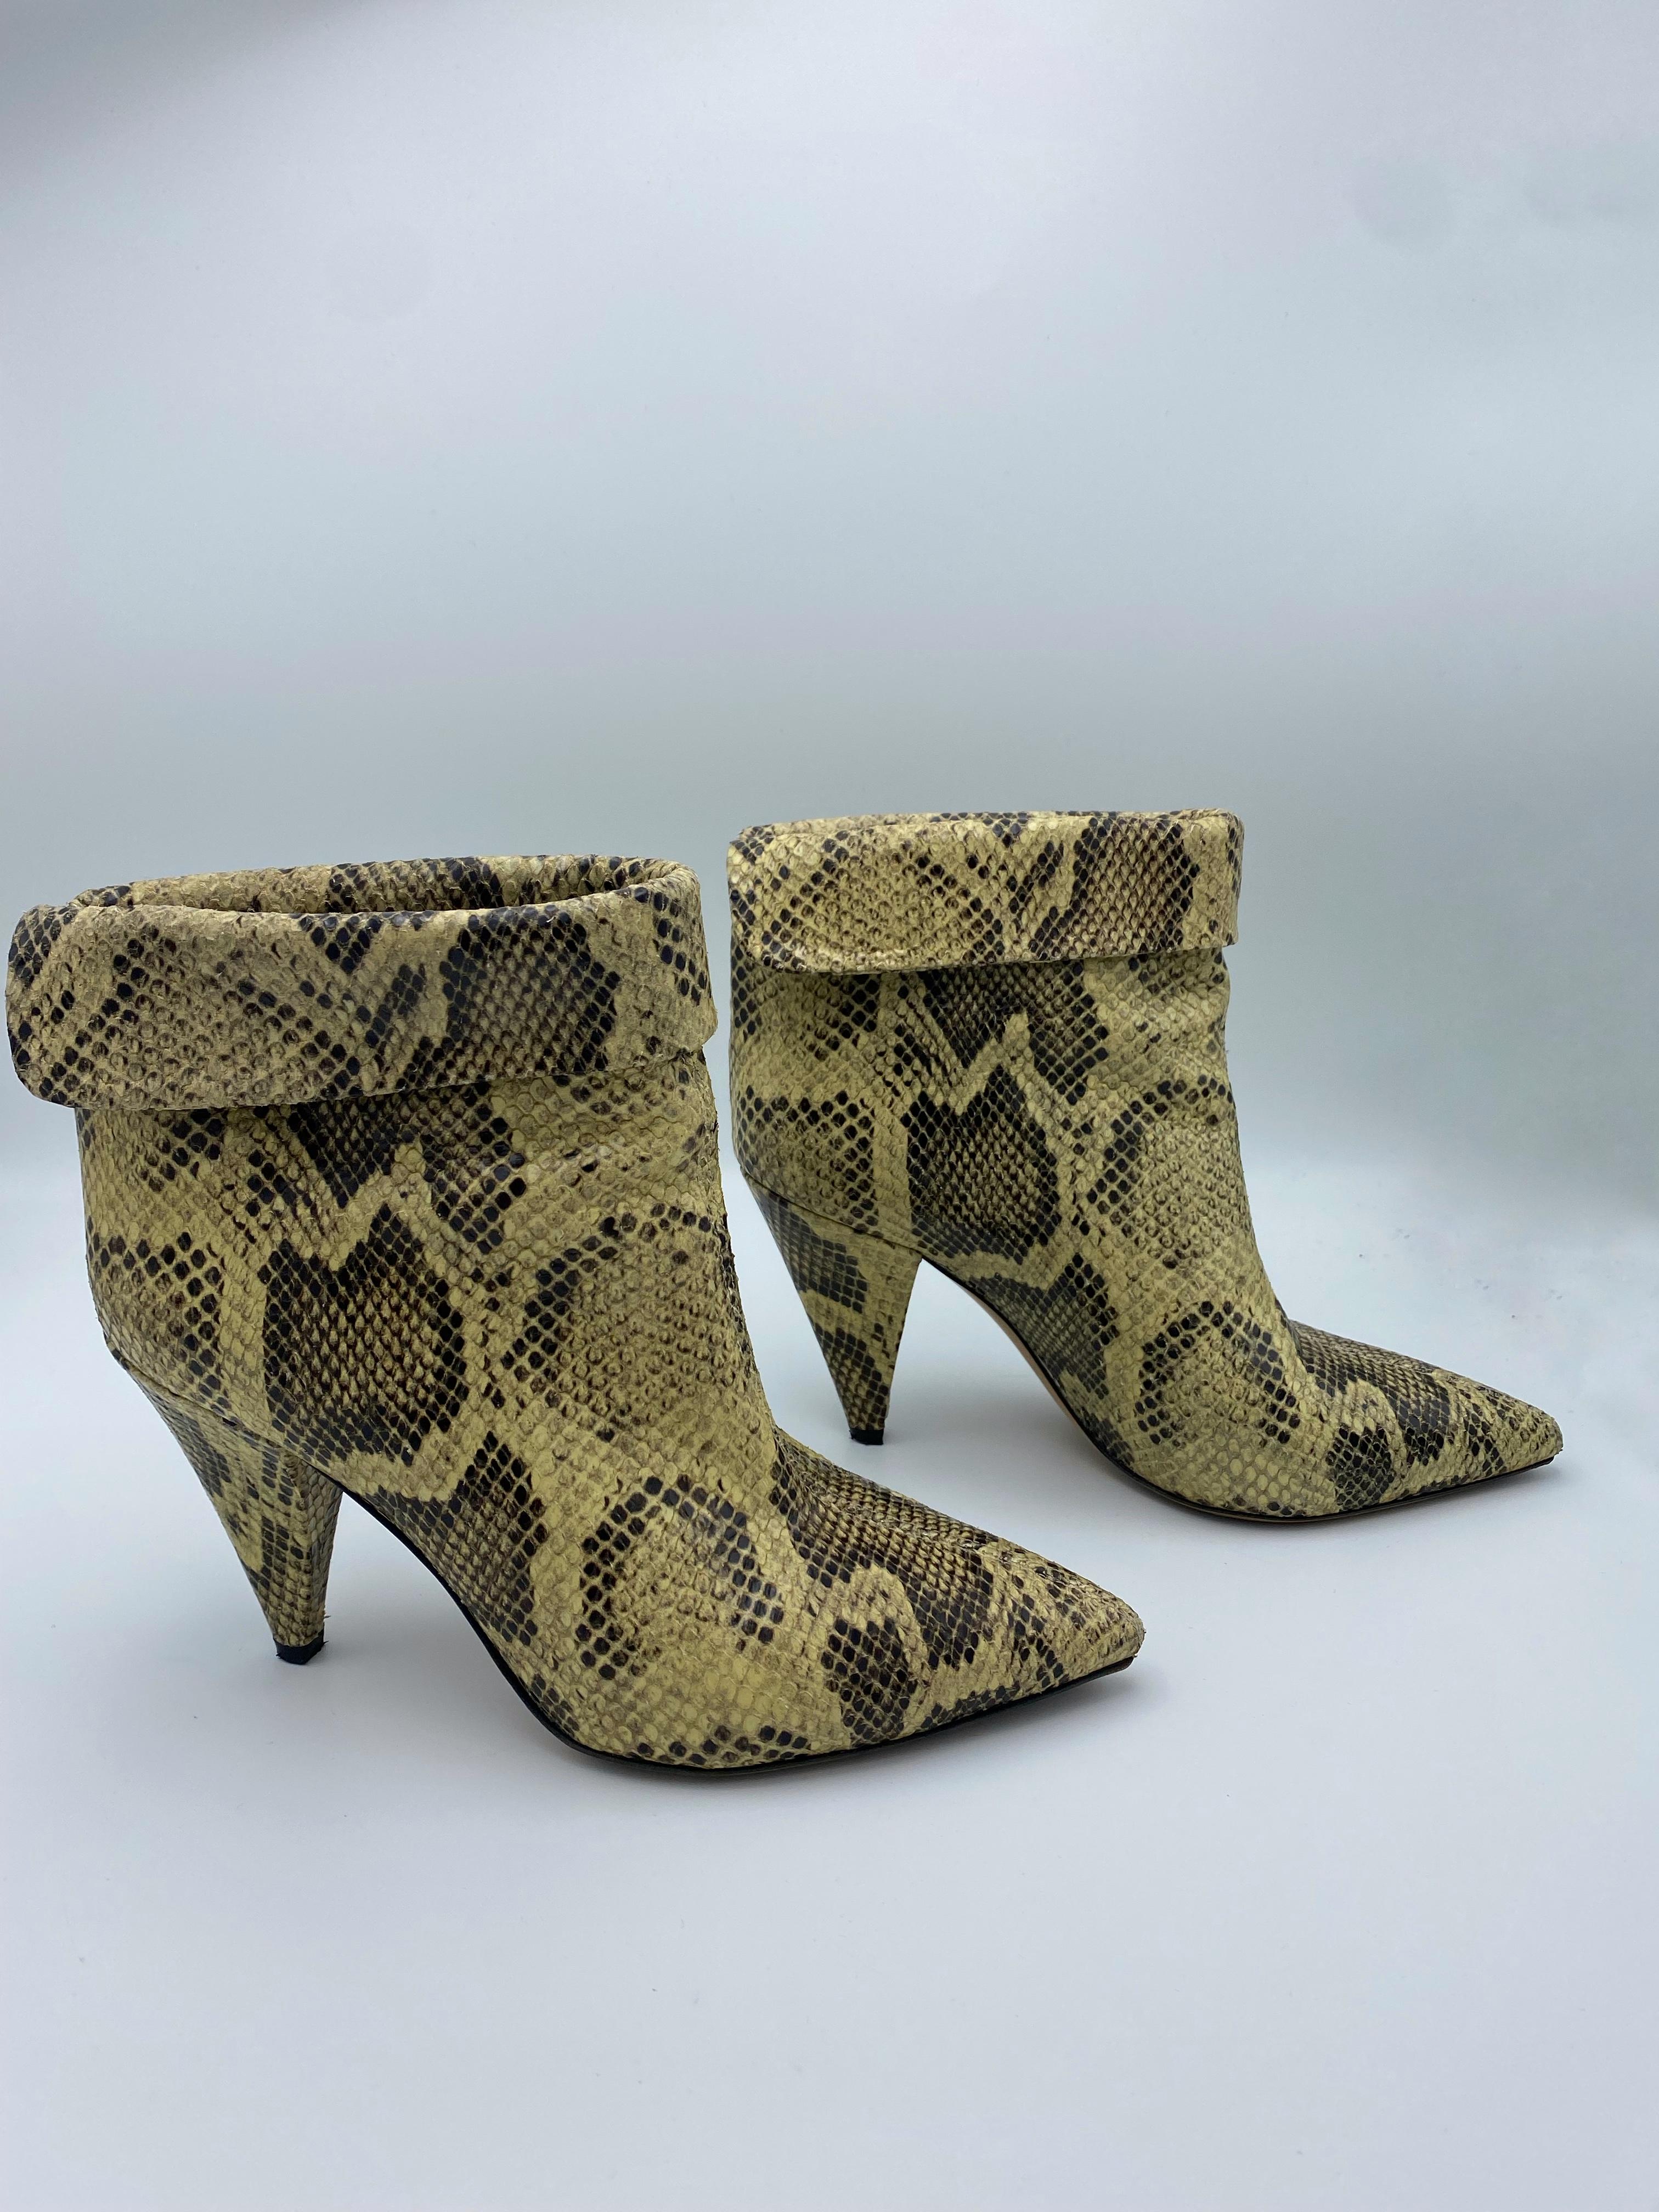 - Animal, snake skin leather
- Pointy toe
- Folded detail
- Heel height is 3.25
- Comes with the box